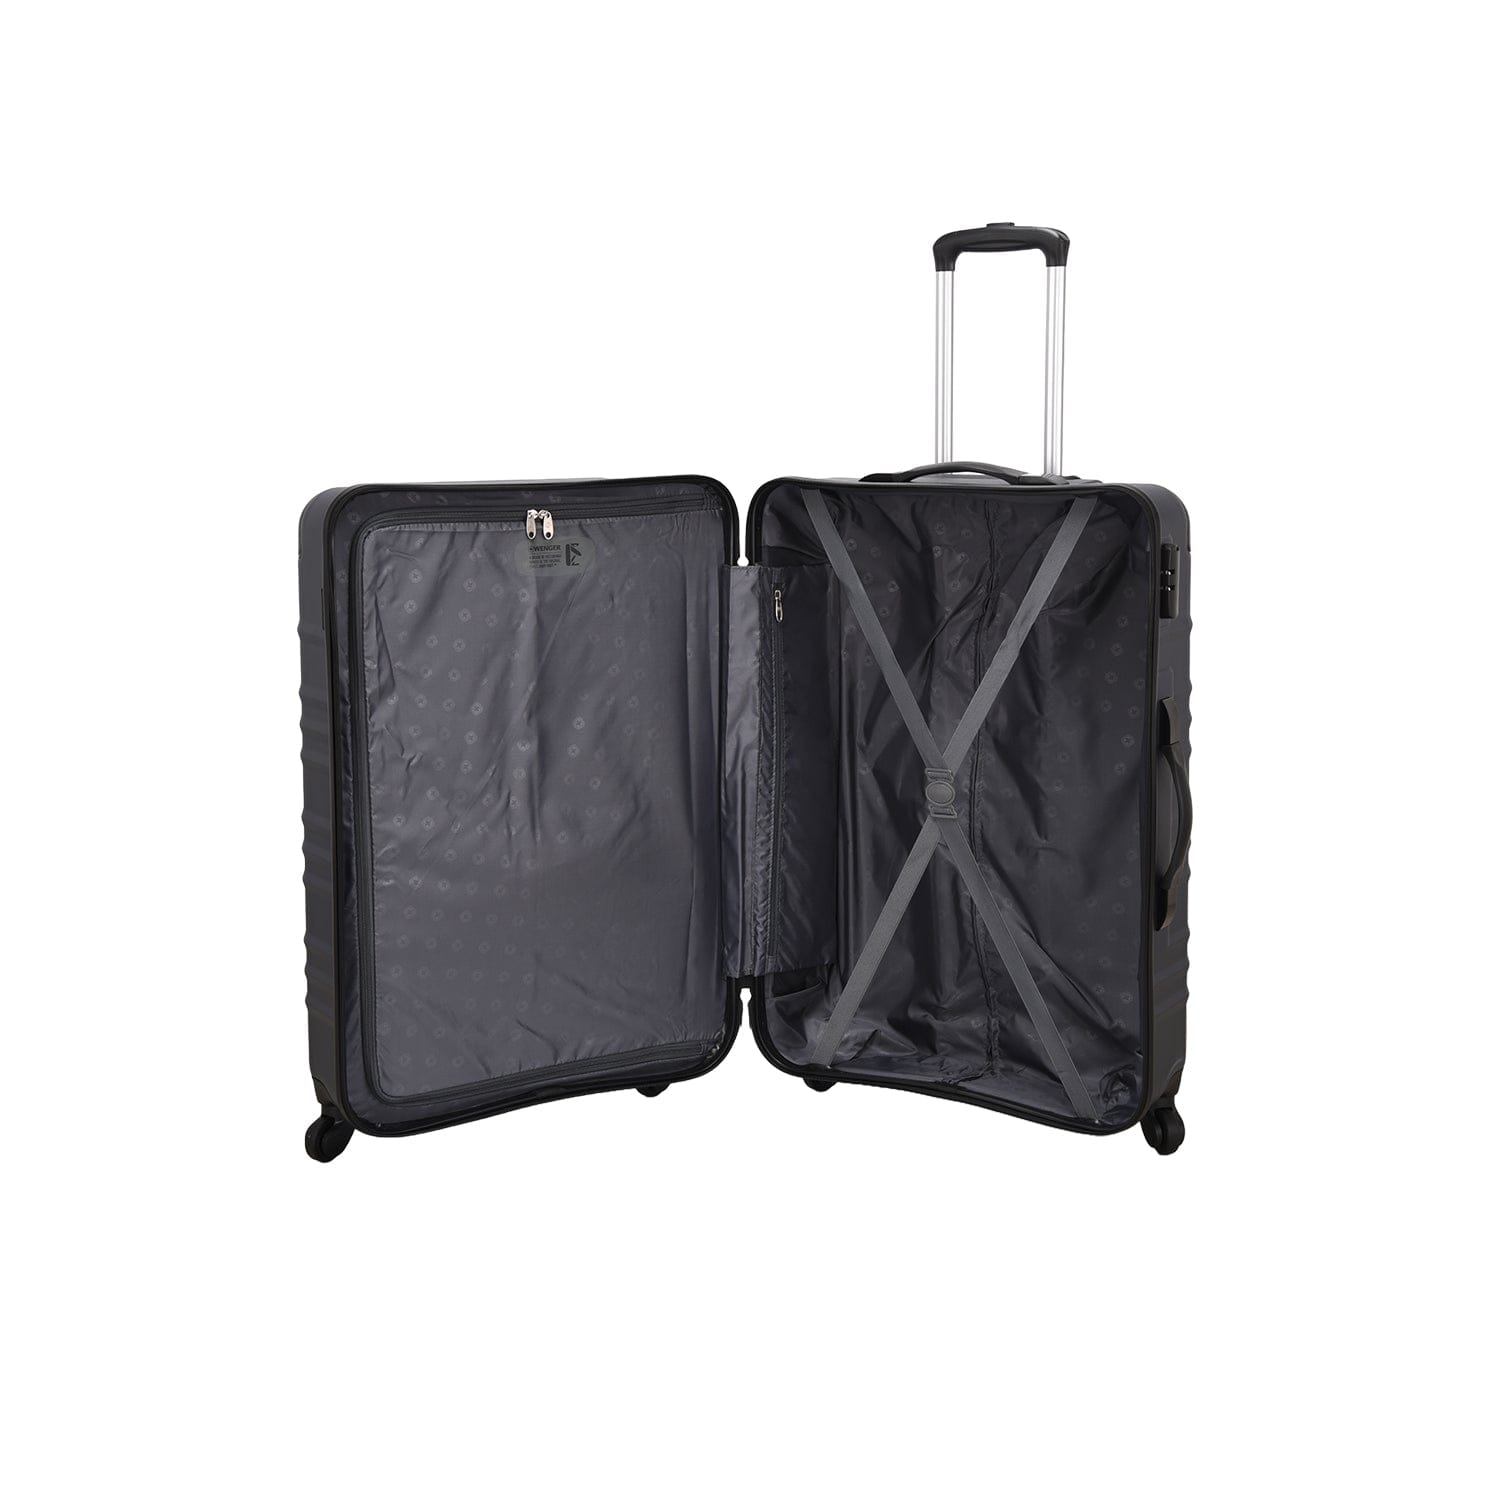 Wenger Amplar 3 Piece 53+65+75cm Hardside Non-Expandable Check-In Luggage Trolley Set Navy Blue - 653150